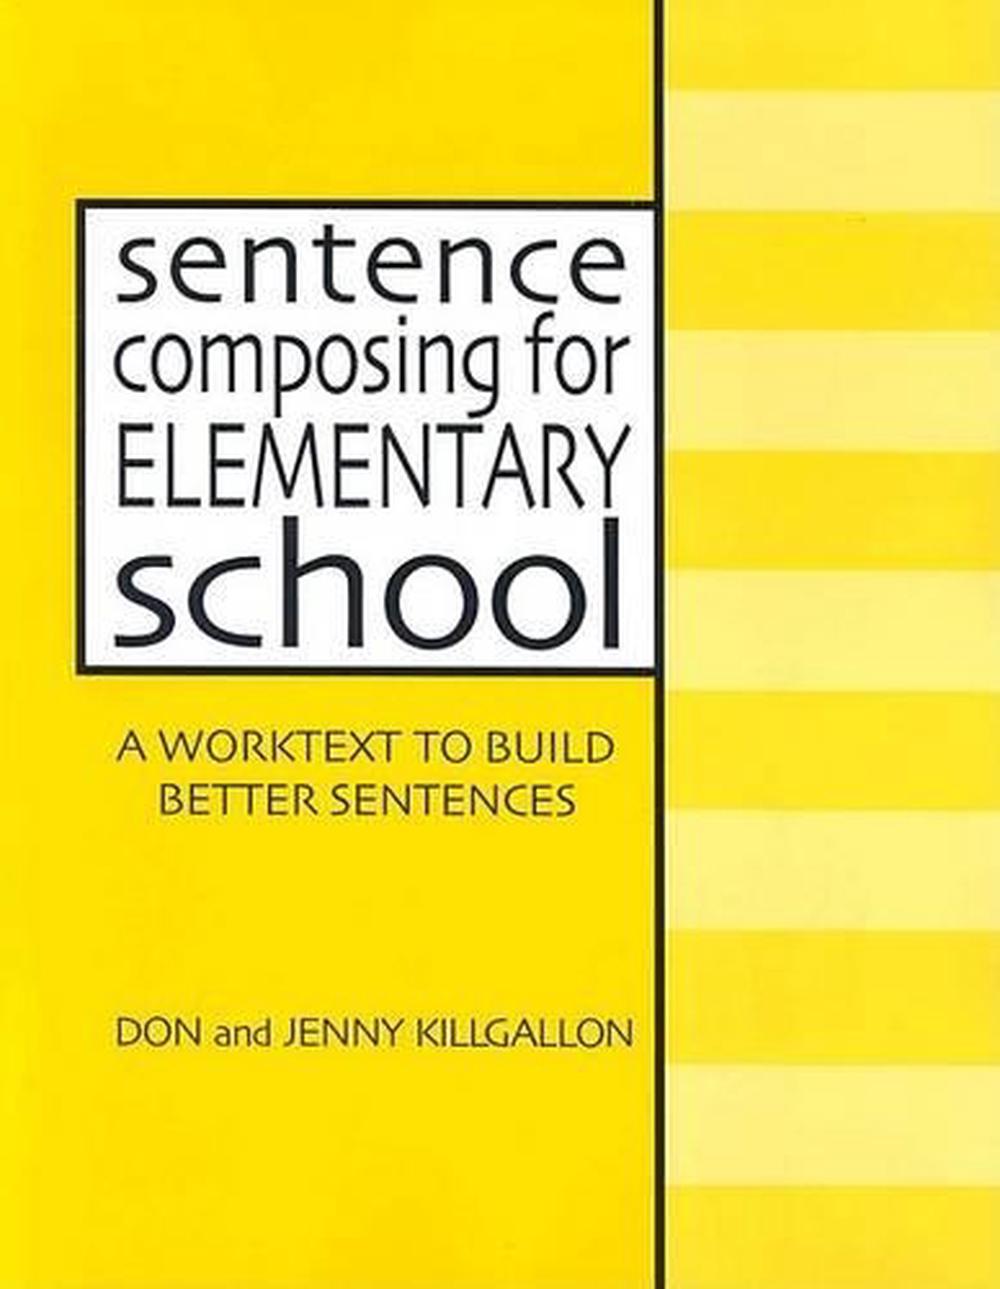 sentence-composing-for-elementary-school-a-worktext-to-build-better-sentences-by-don-killgallon